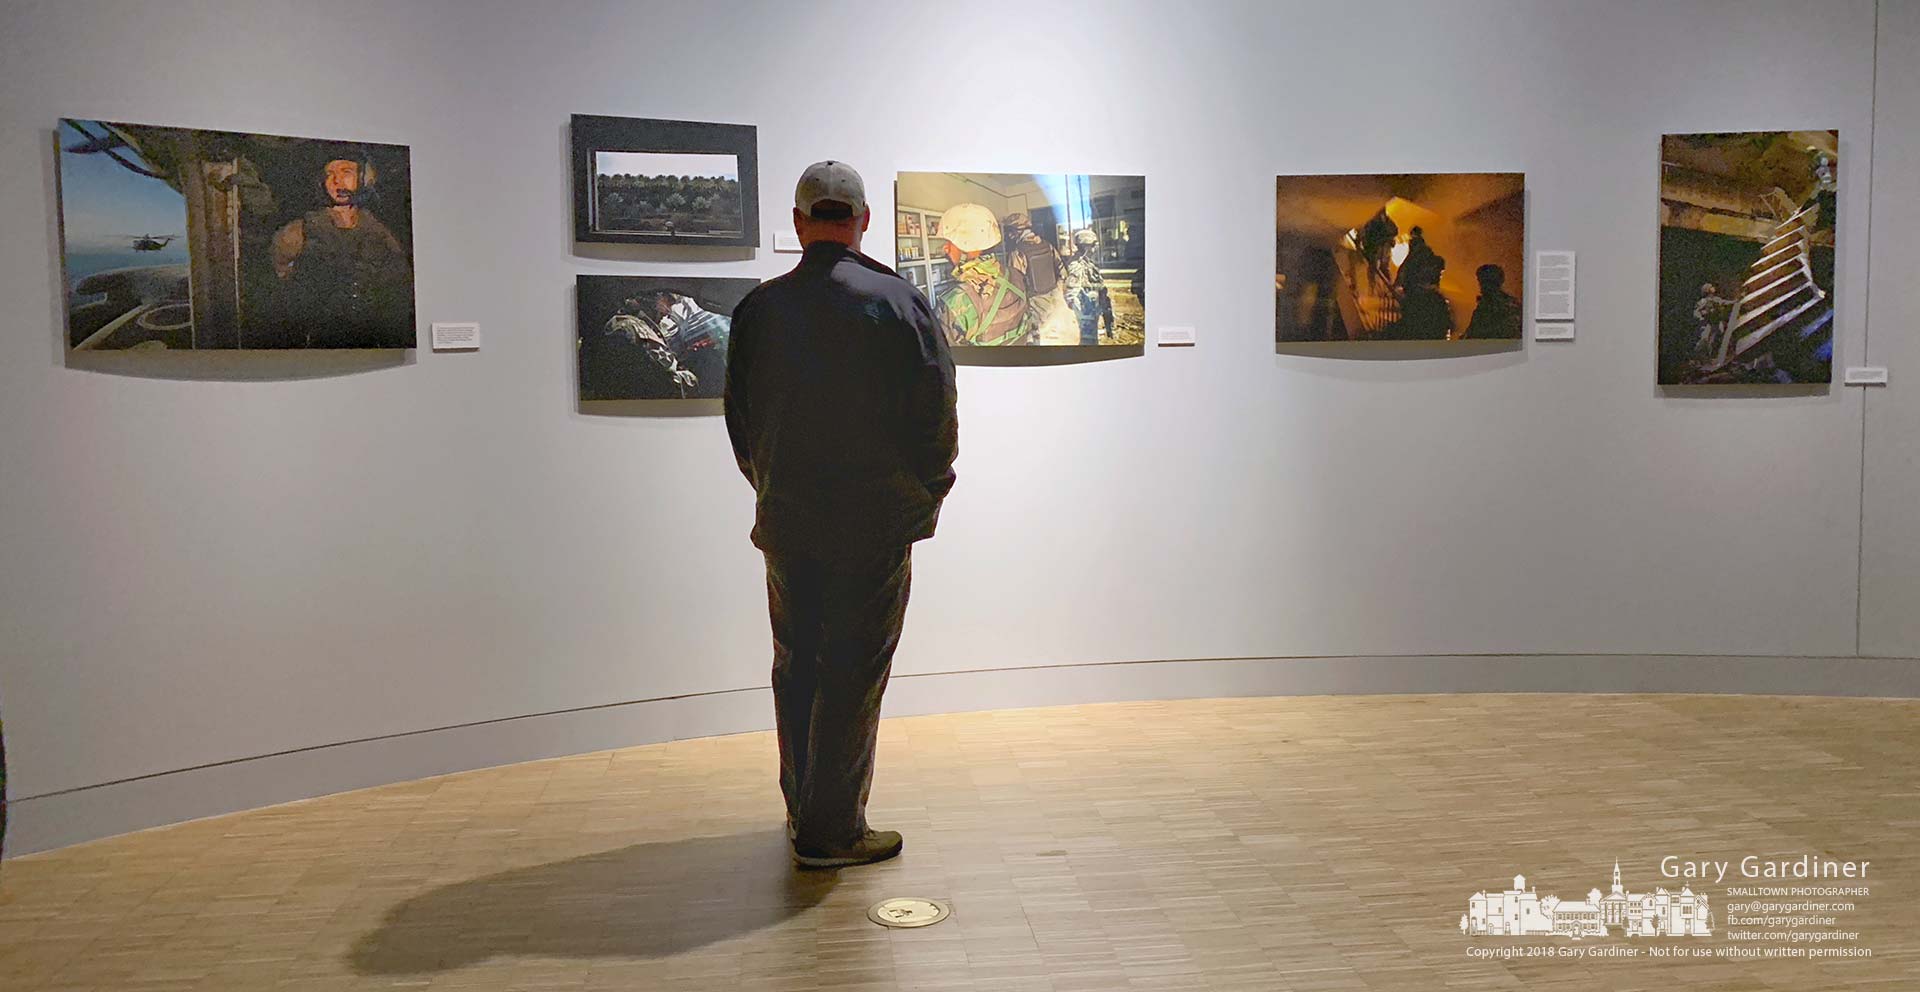 A man pauses to read the notes on Stacy Pearsall's photos hanging in the lower level of the National Veterans Memorial and Museum in Columbus, Ohio, on its opening weekend. My Final Photo for Oct. 28, 2018.